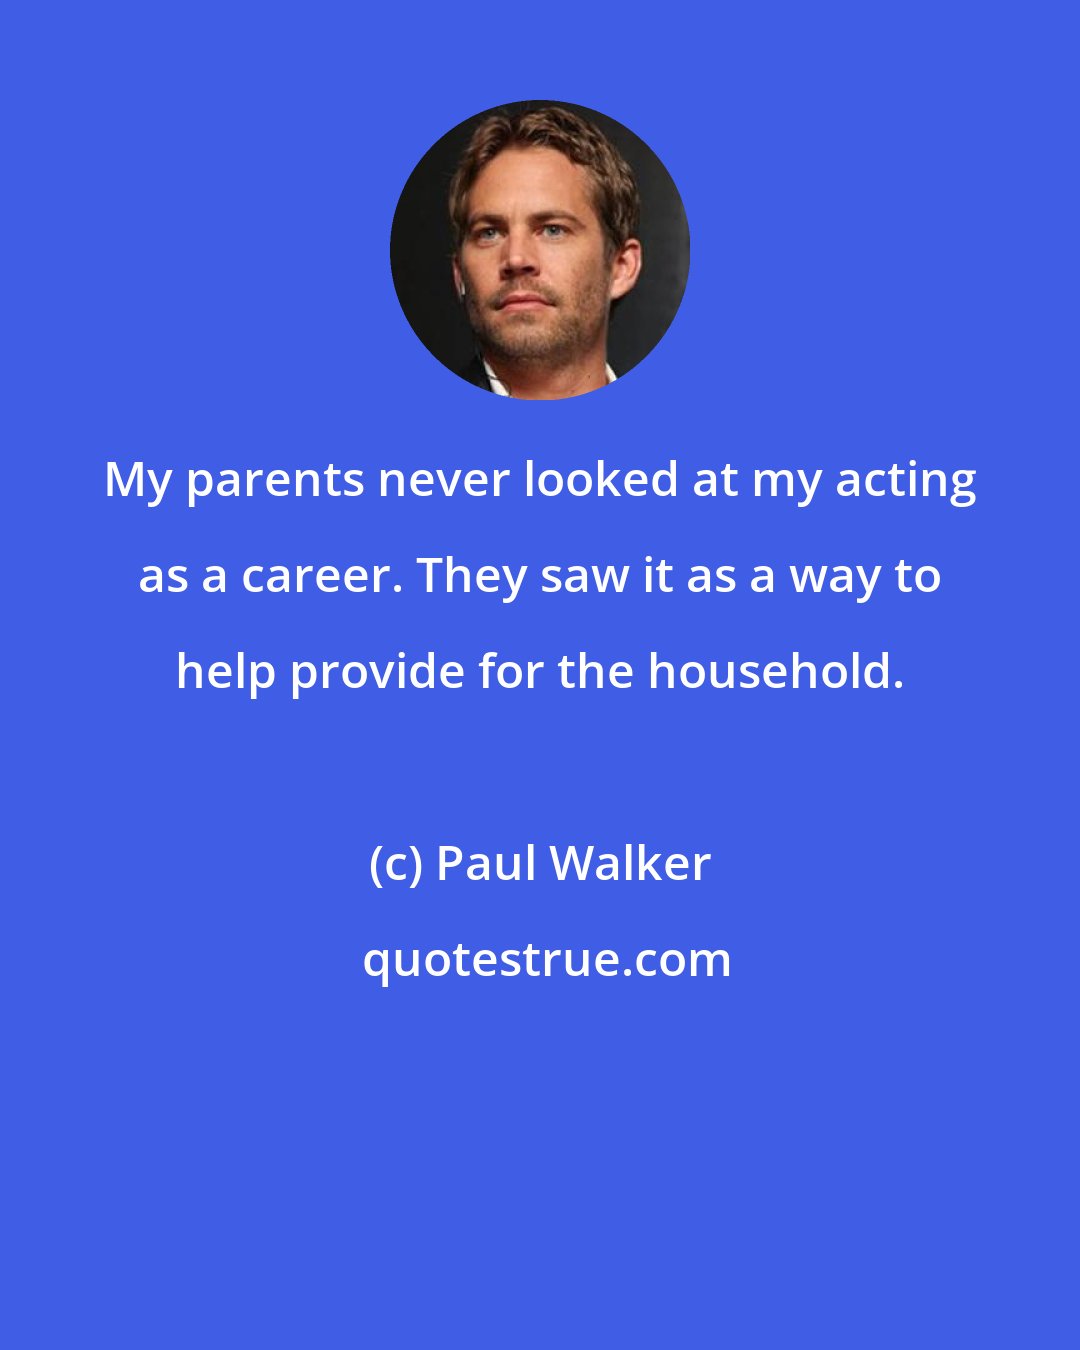 Paul Walker: My parents never looked at my acting as a career. They saw it as a way to help provide for the household.